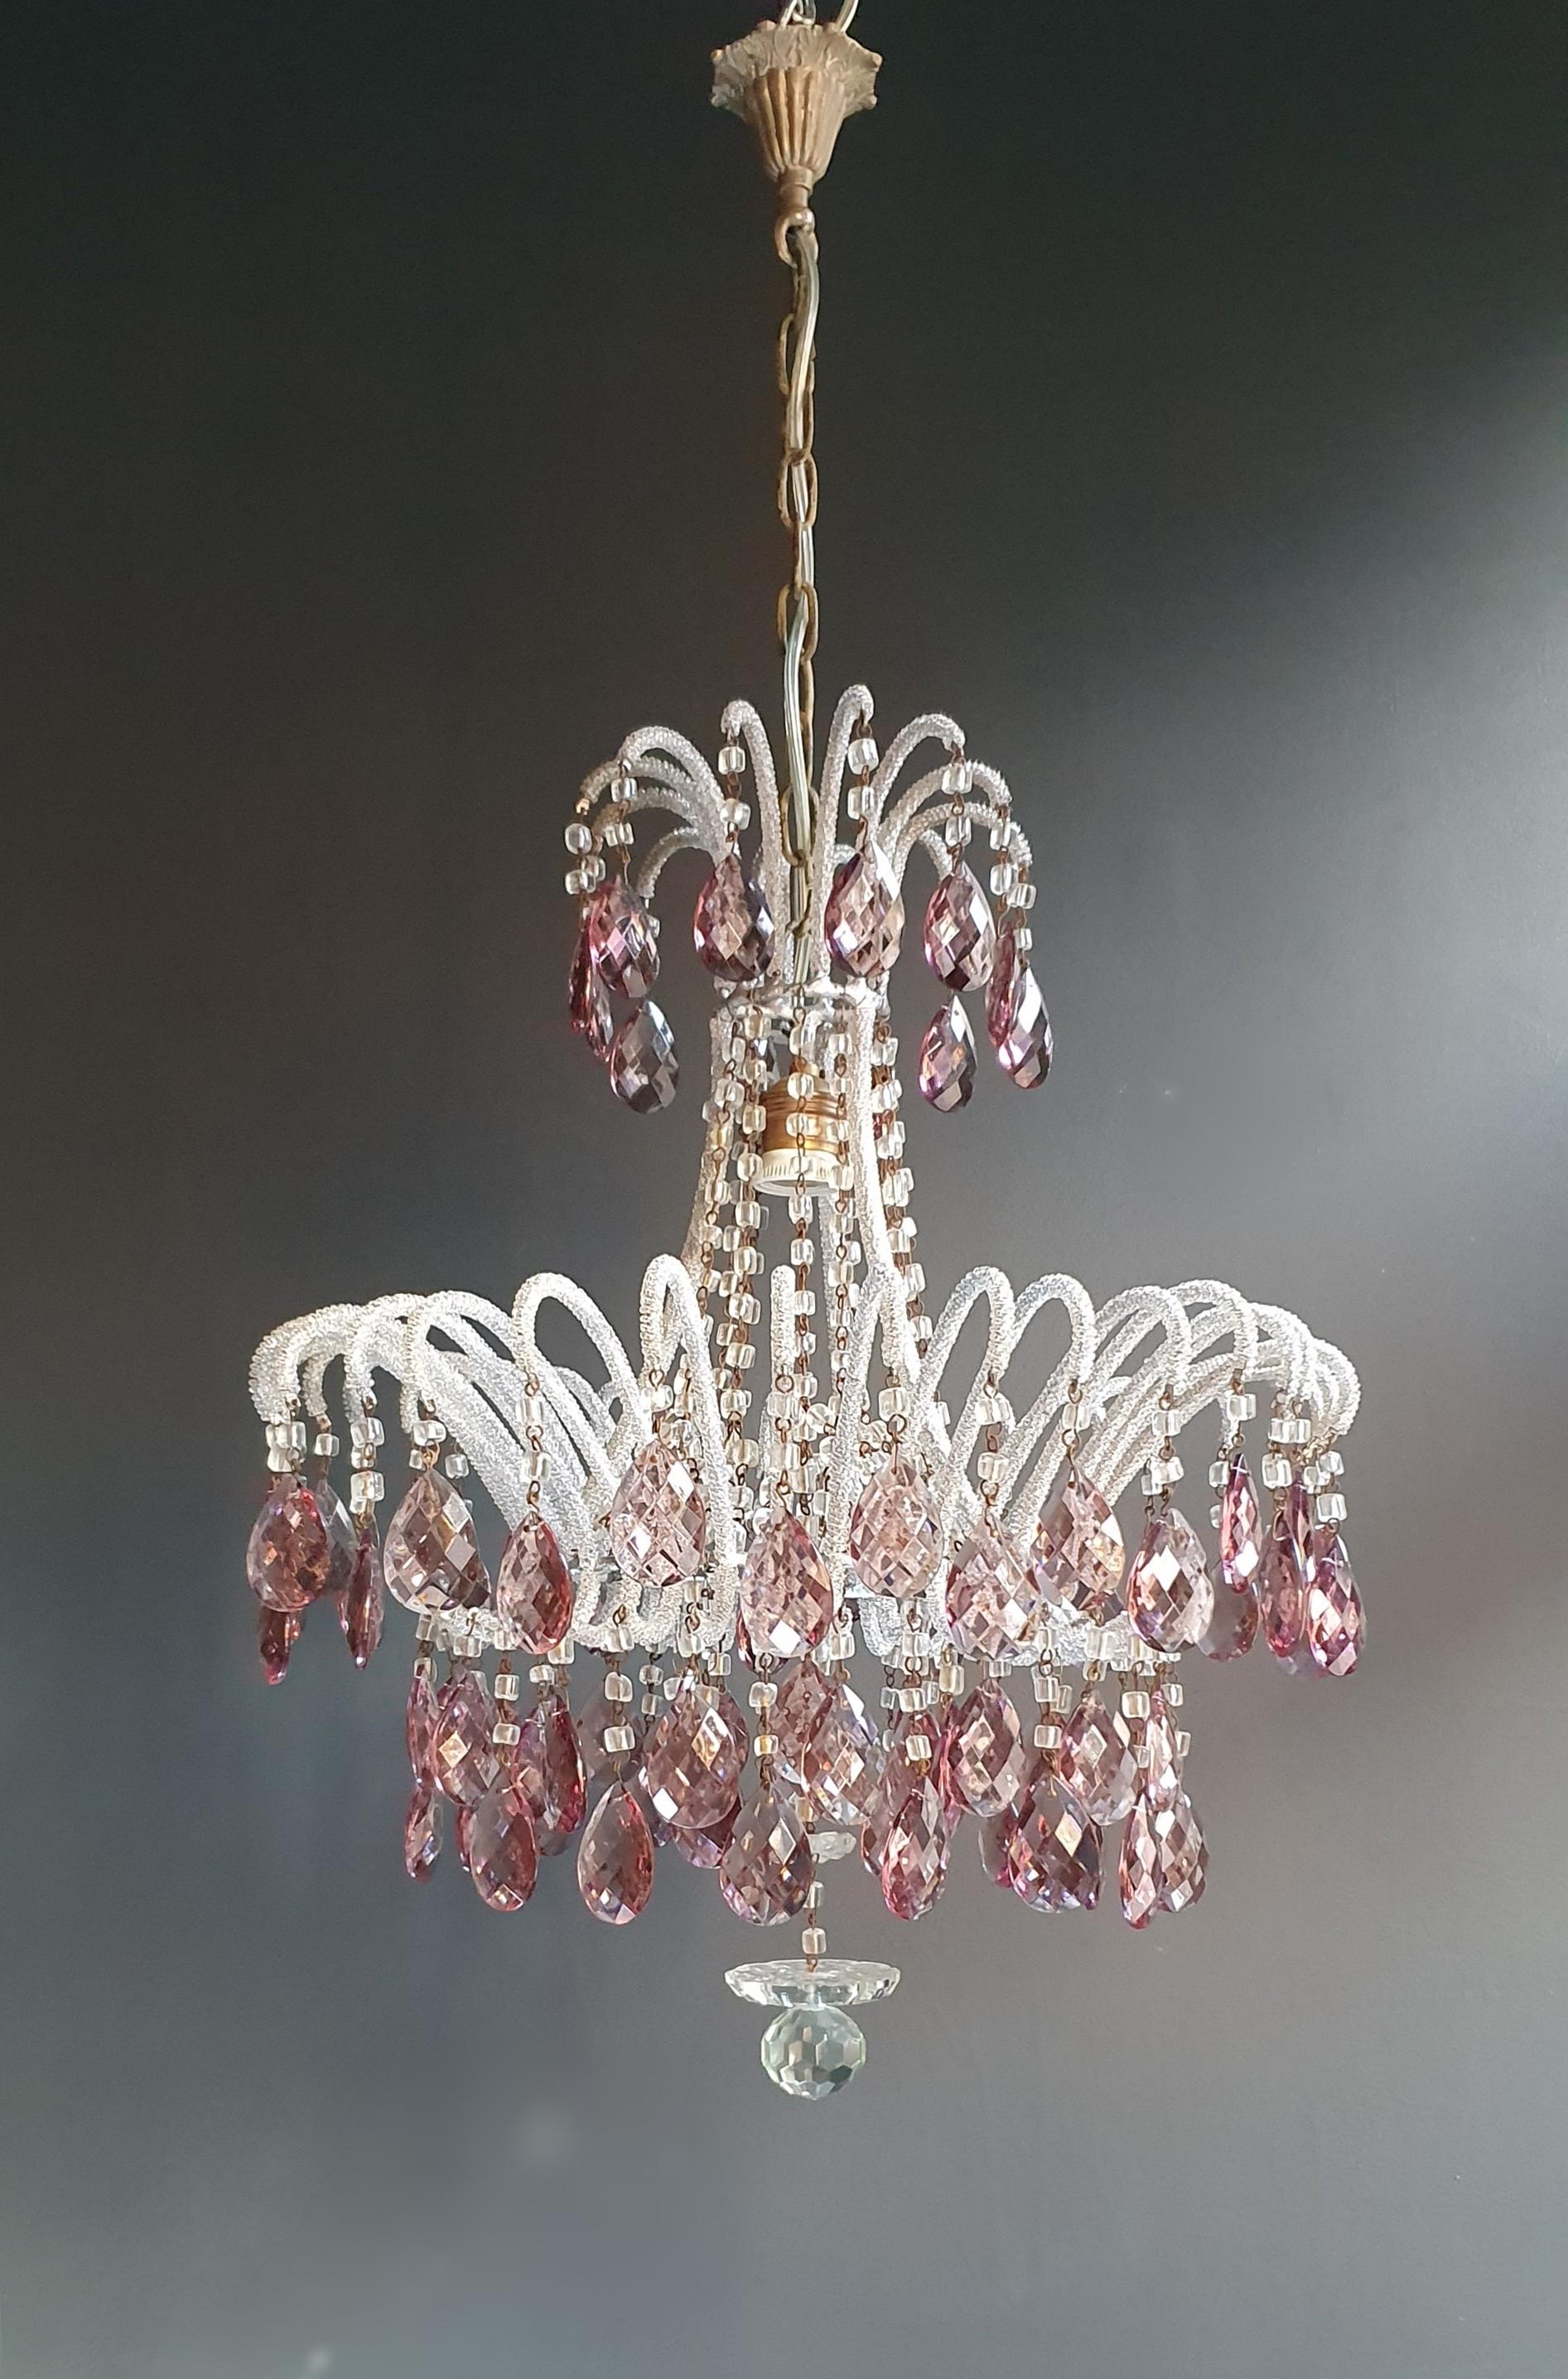 Purple crystal chandelier antique ceiling Murano Florentiner lustre Art Nouveau

Measures: Total height 90 cm, height without chain 58 cm, diameter 44 cm. Weight (approximately): 5 kg.

Number of lights: 1 light bulb sockets: E27 material: Iron,